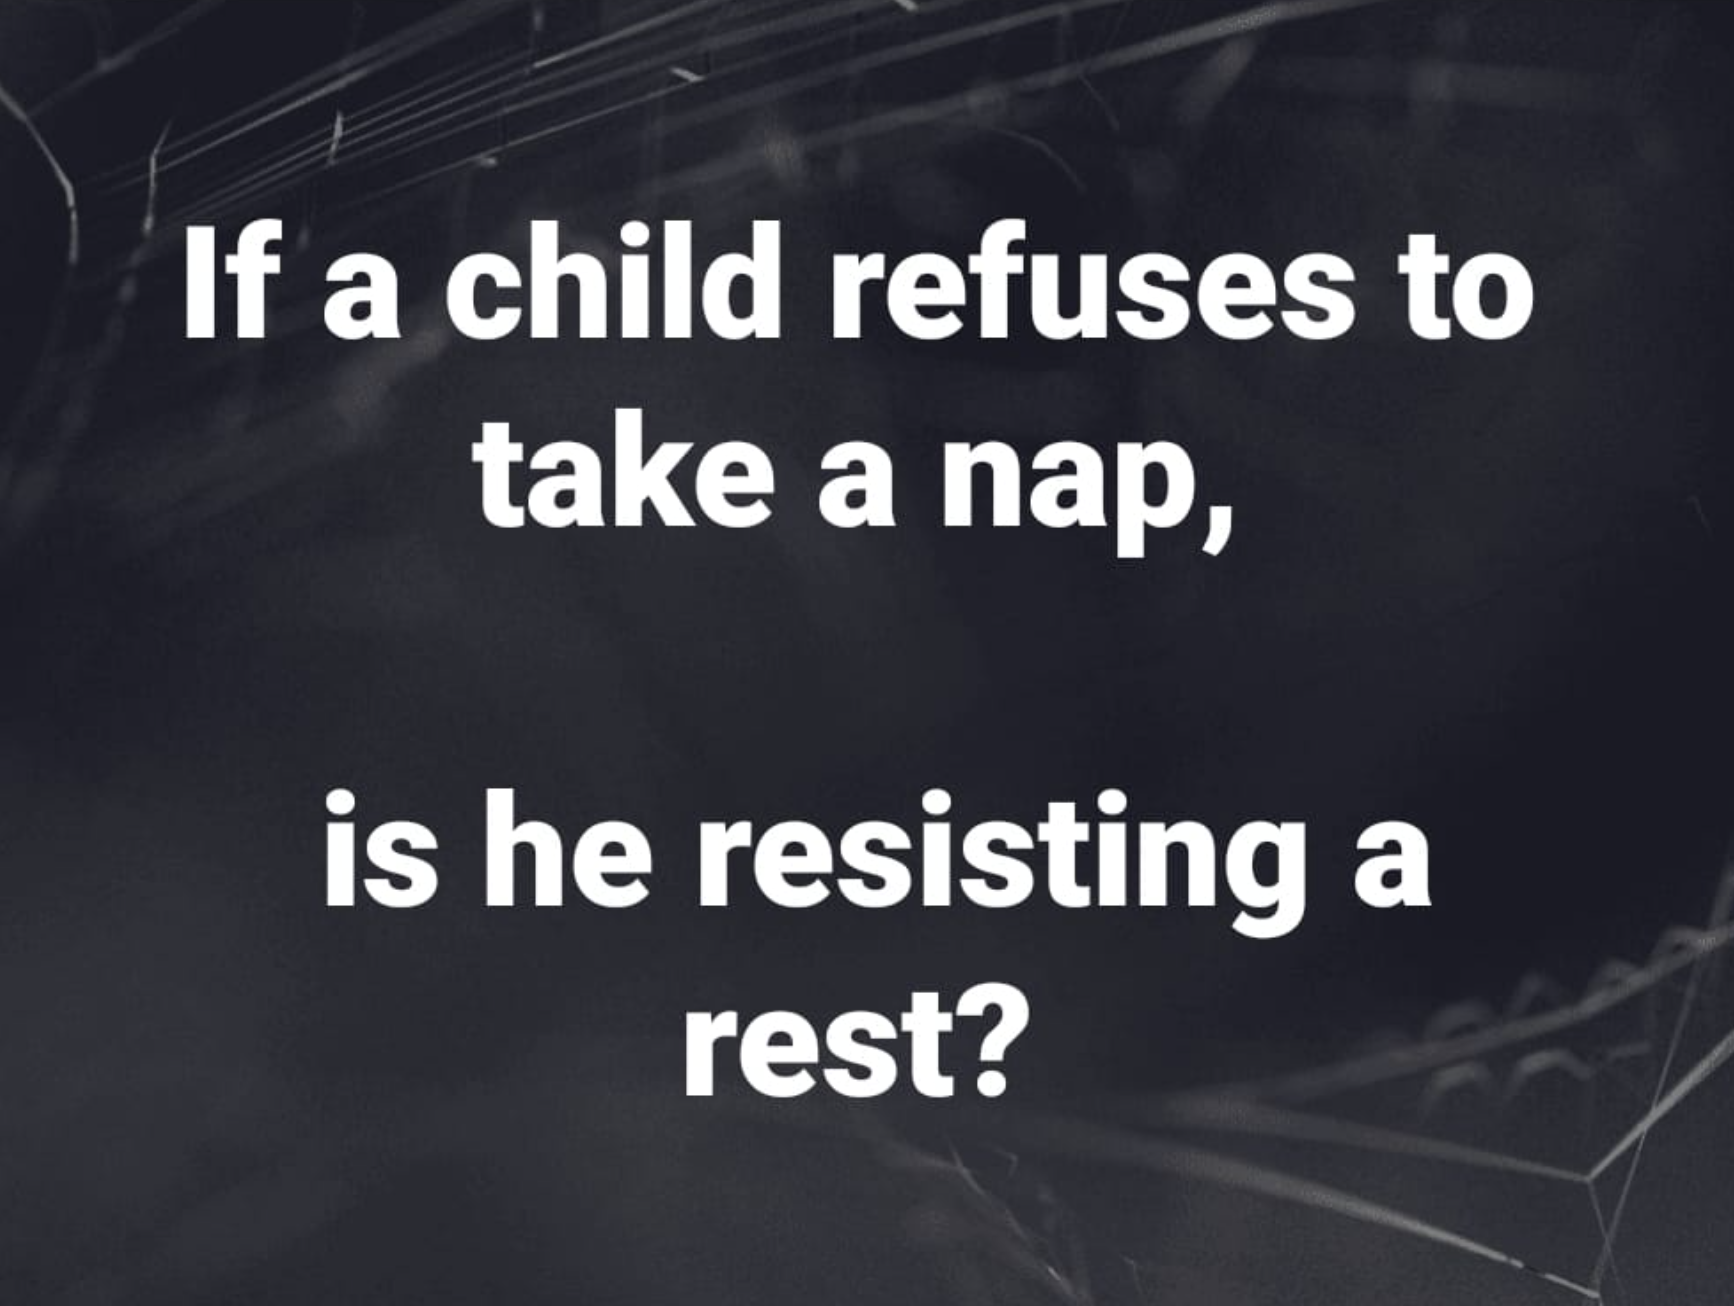 brotips - If a child refuses to take a nap, is he resisting rest?